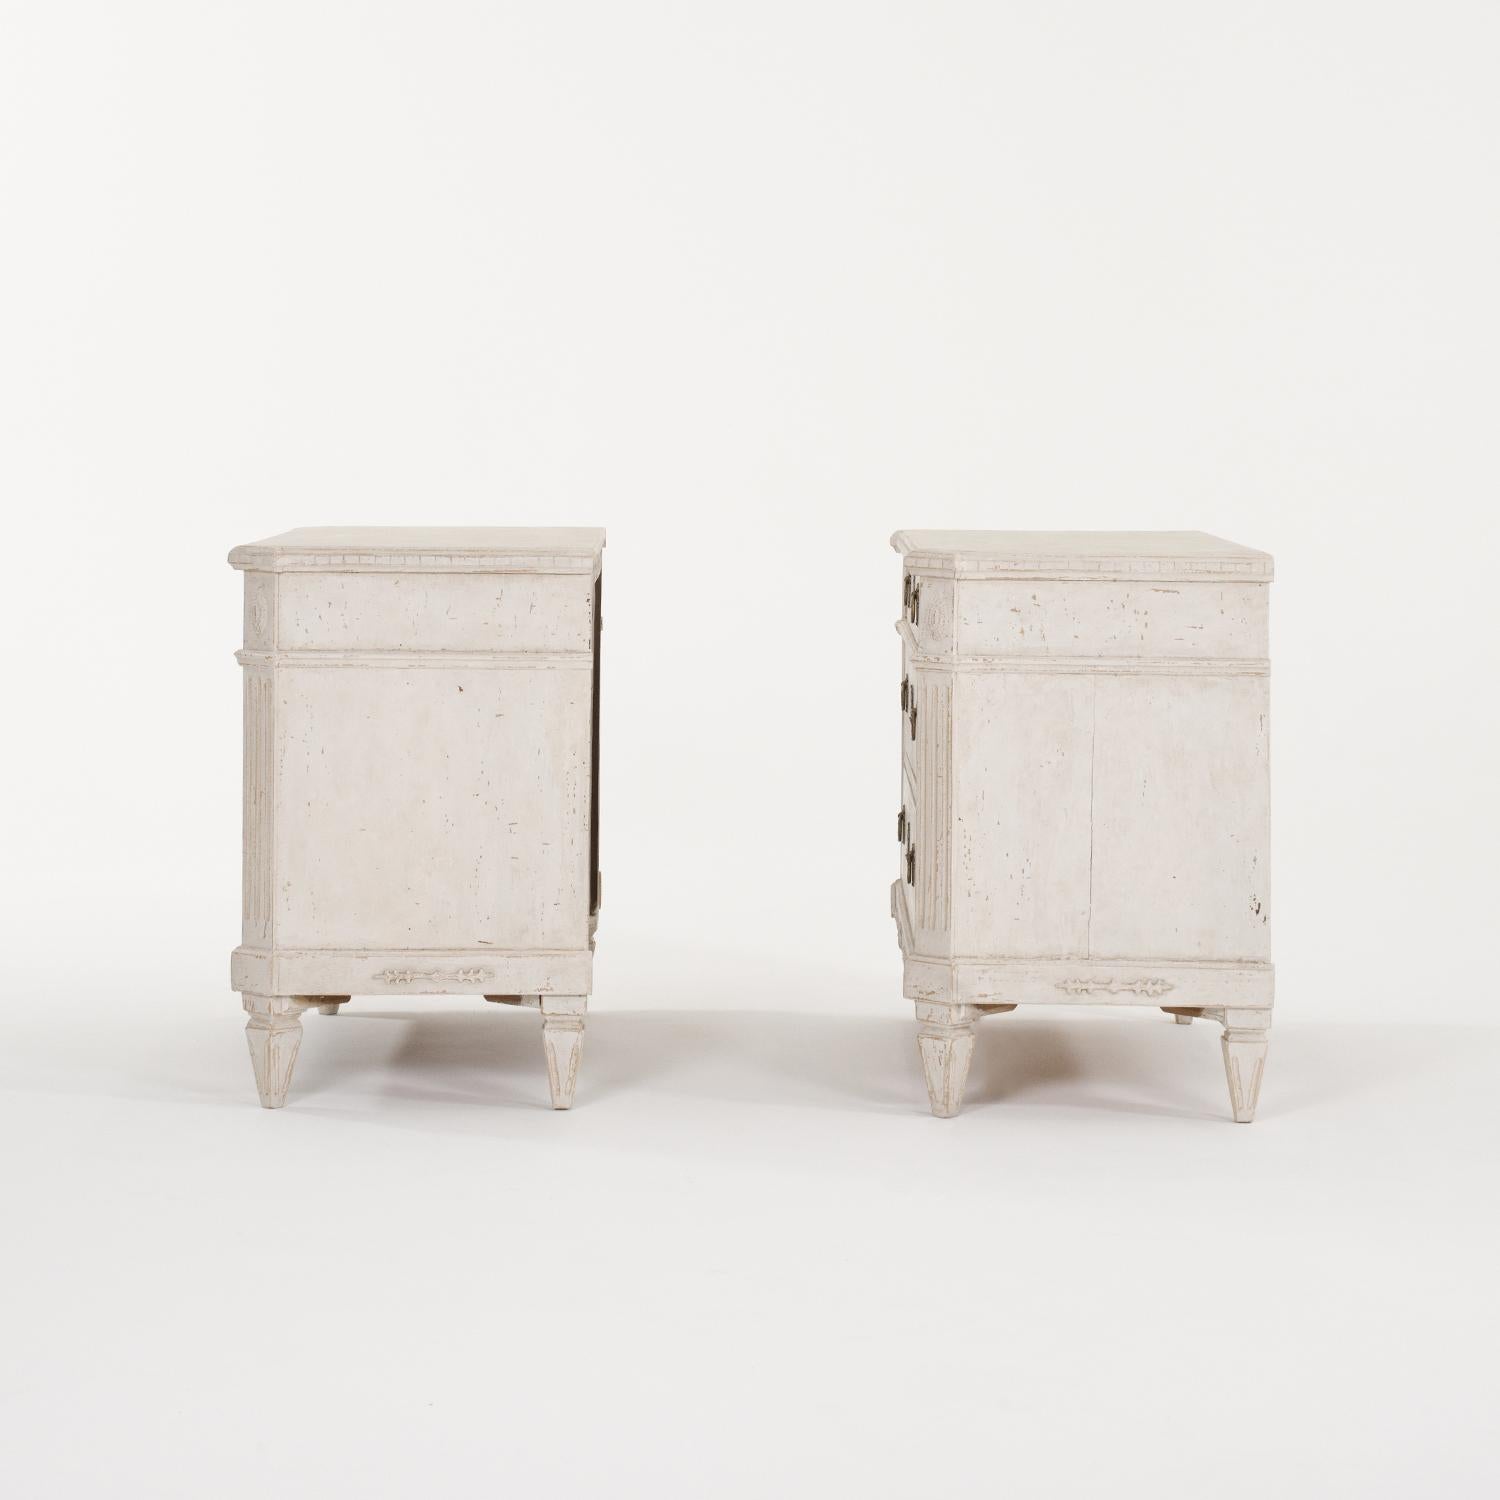 19th Century Swedish Gustavian Pair of Pinewood Chests - Antique Commodes In Good Condition For Sale In West Palm Beach, FL